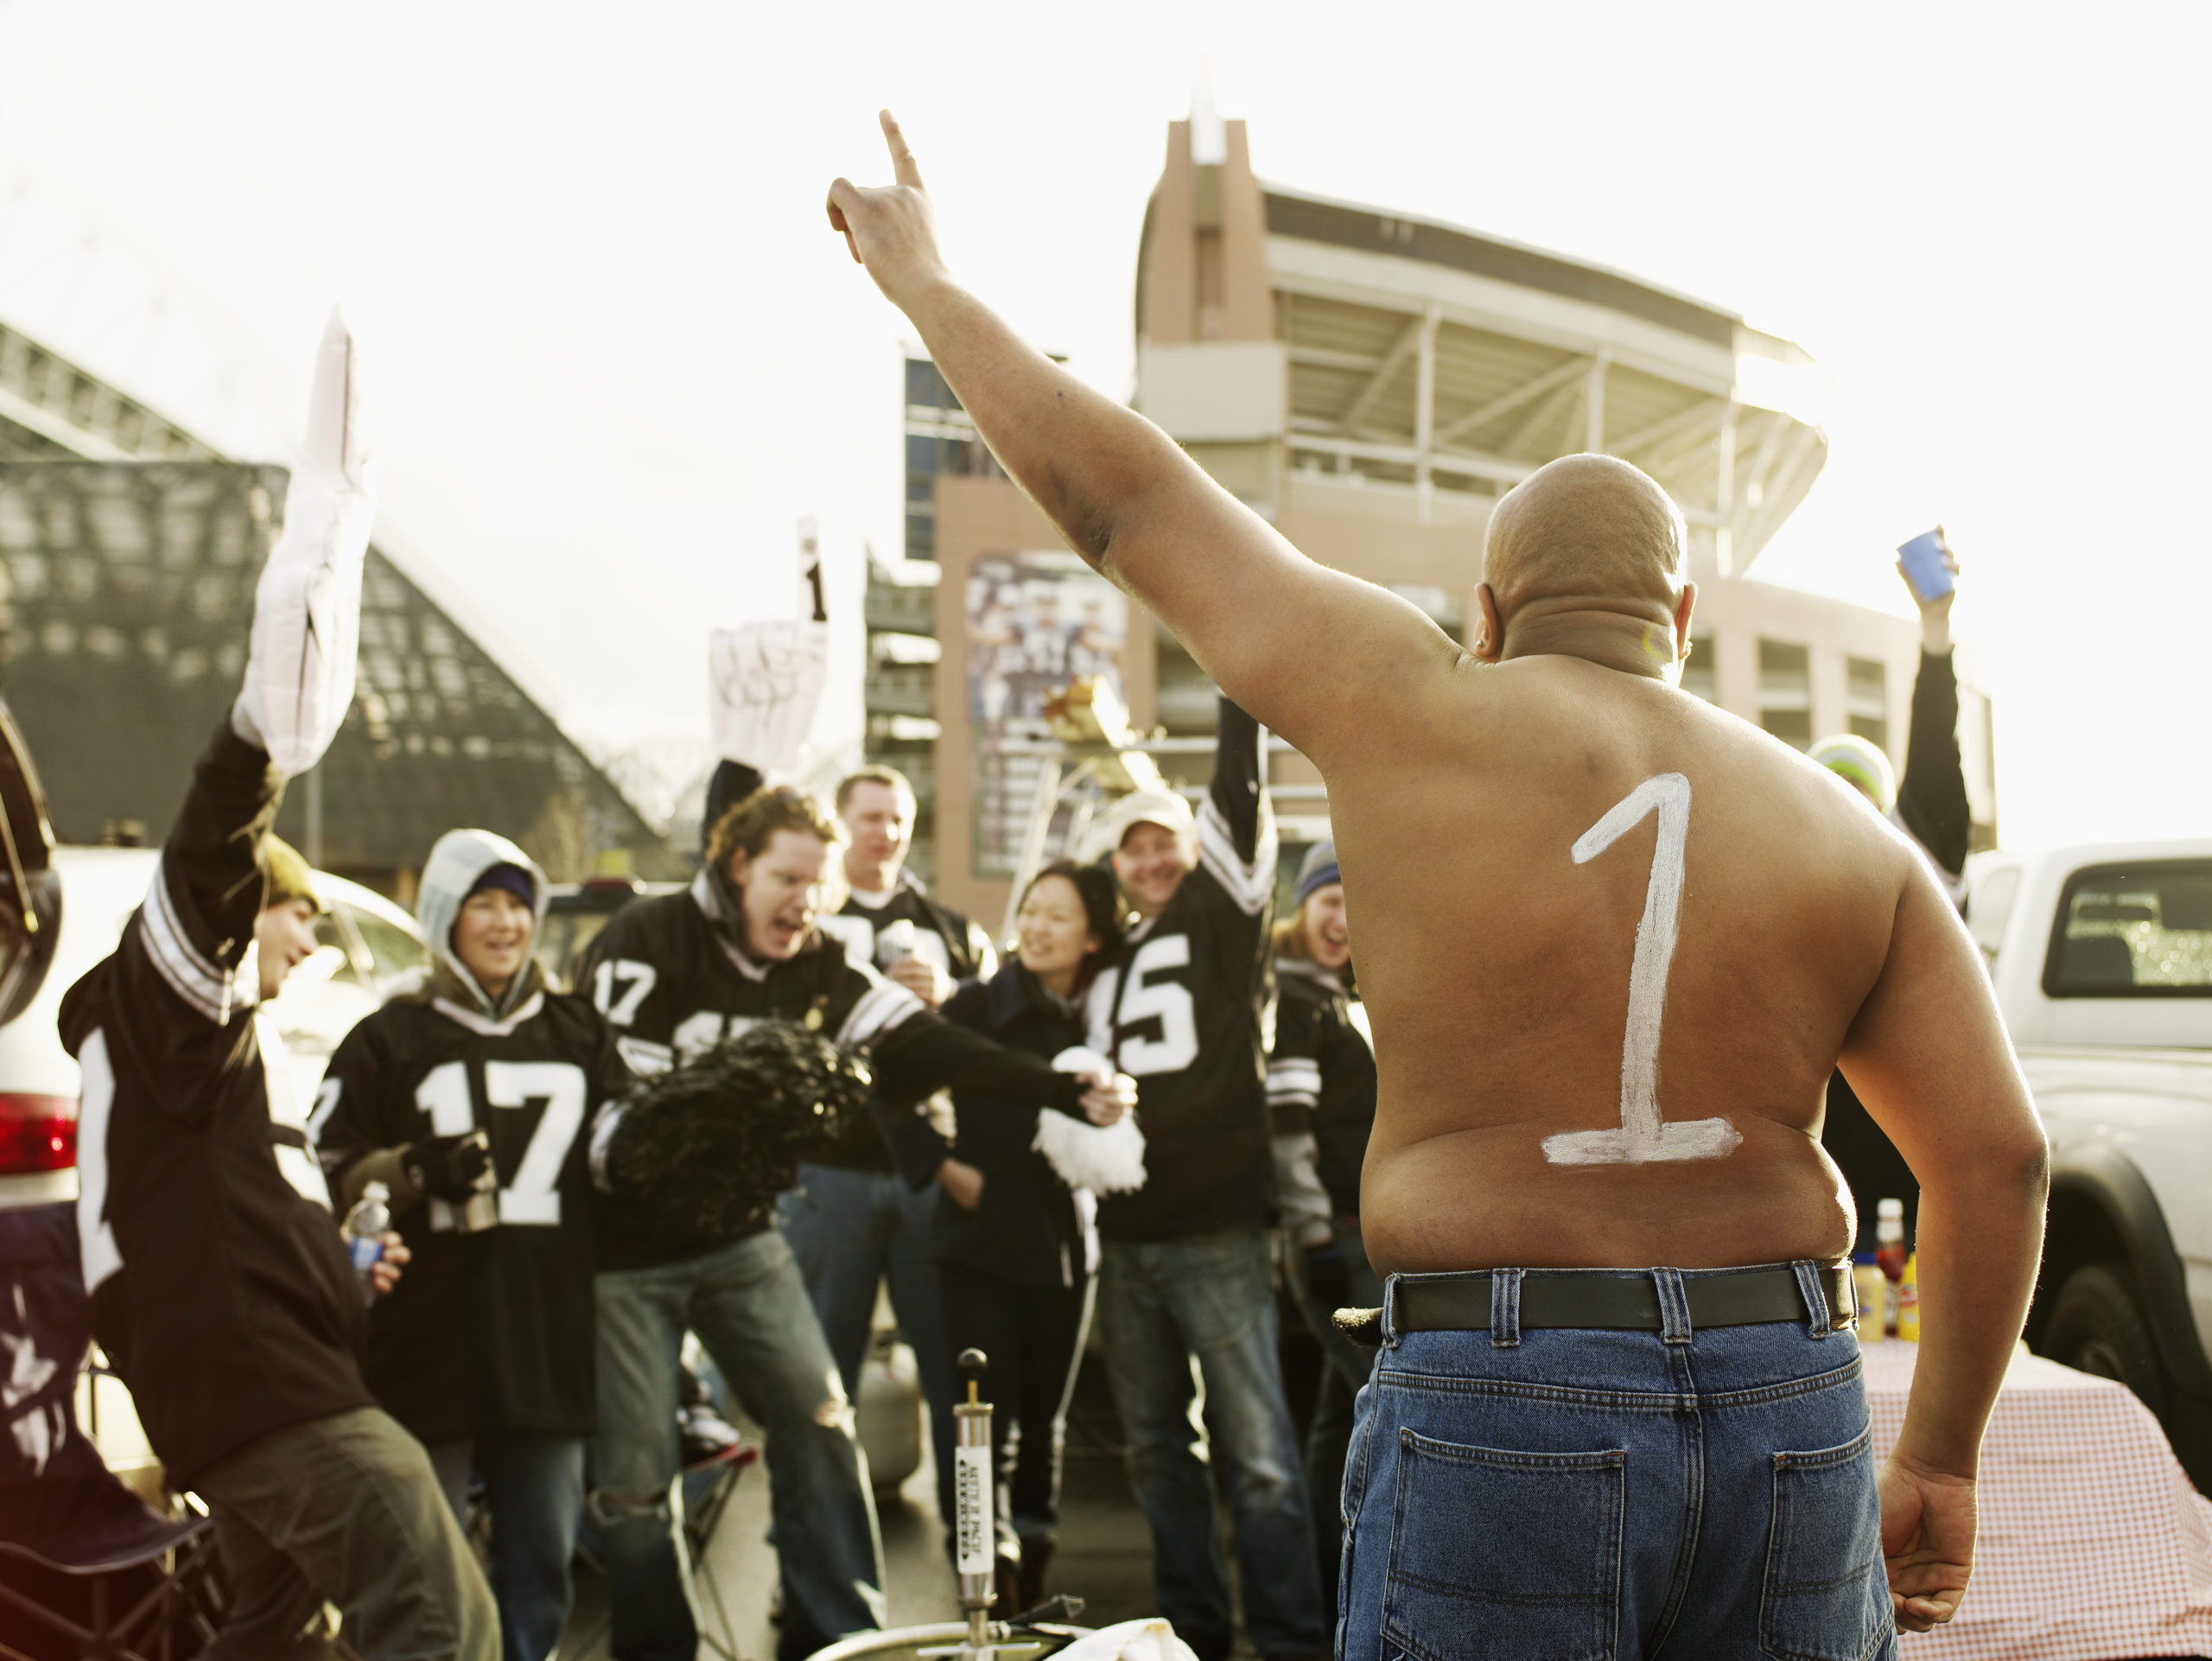 Man with '1' painted on back cheering with friends at tailgate party